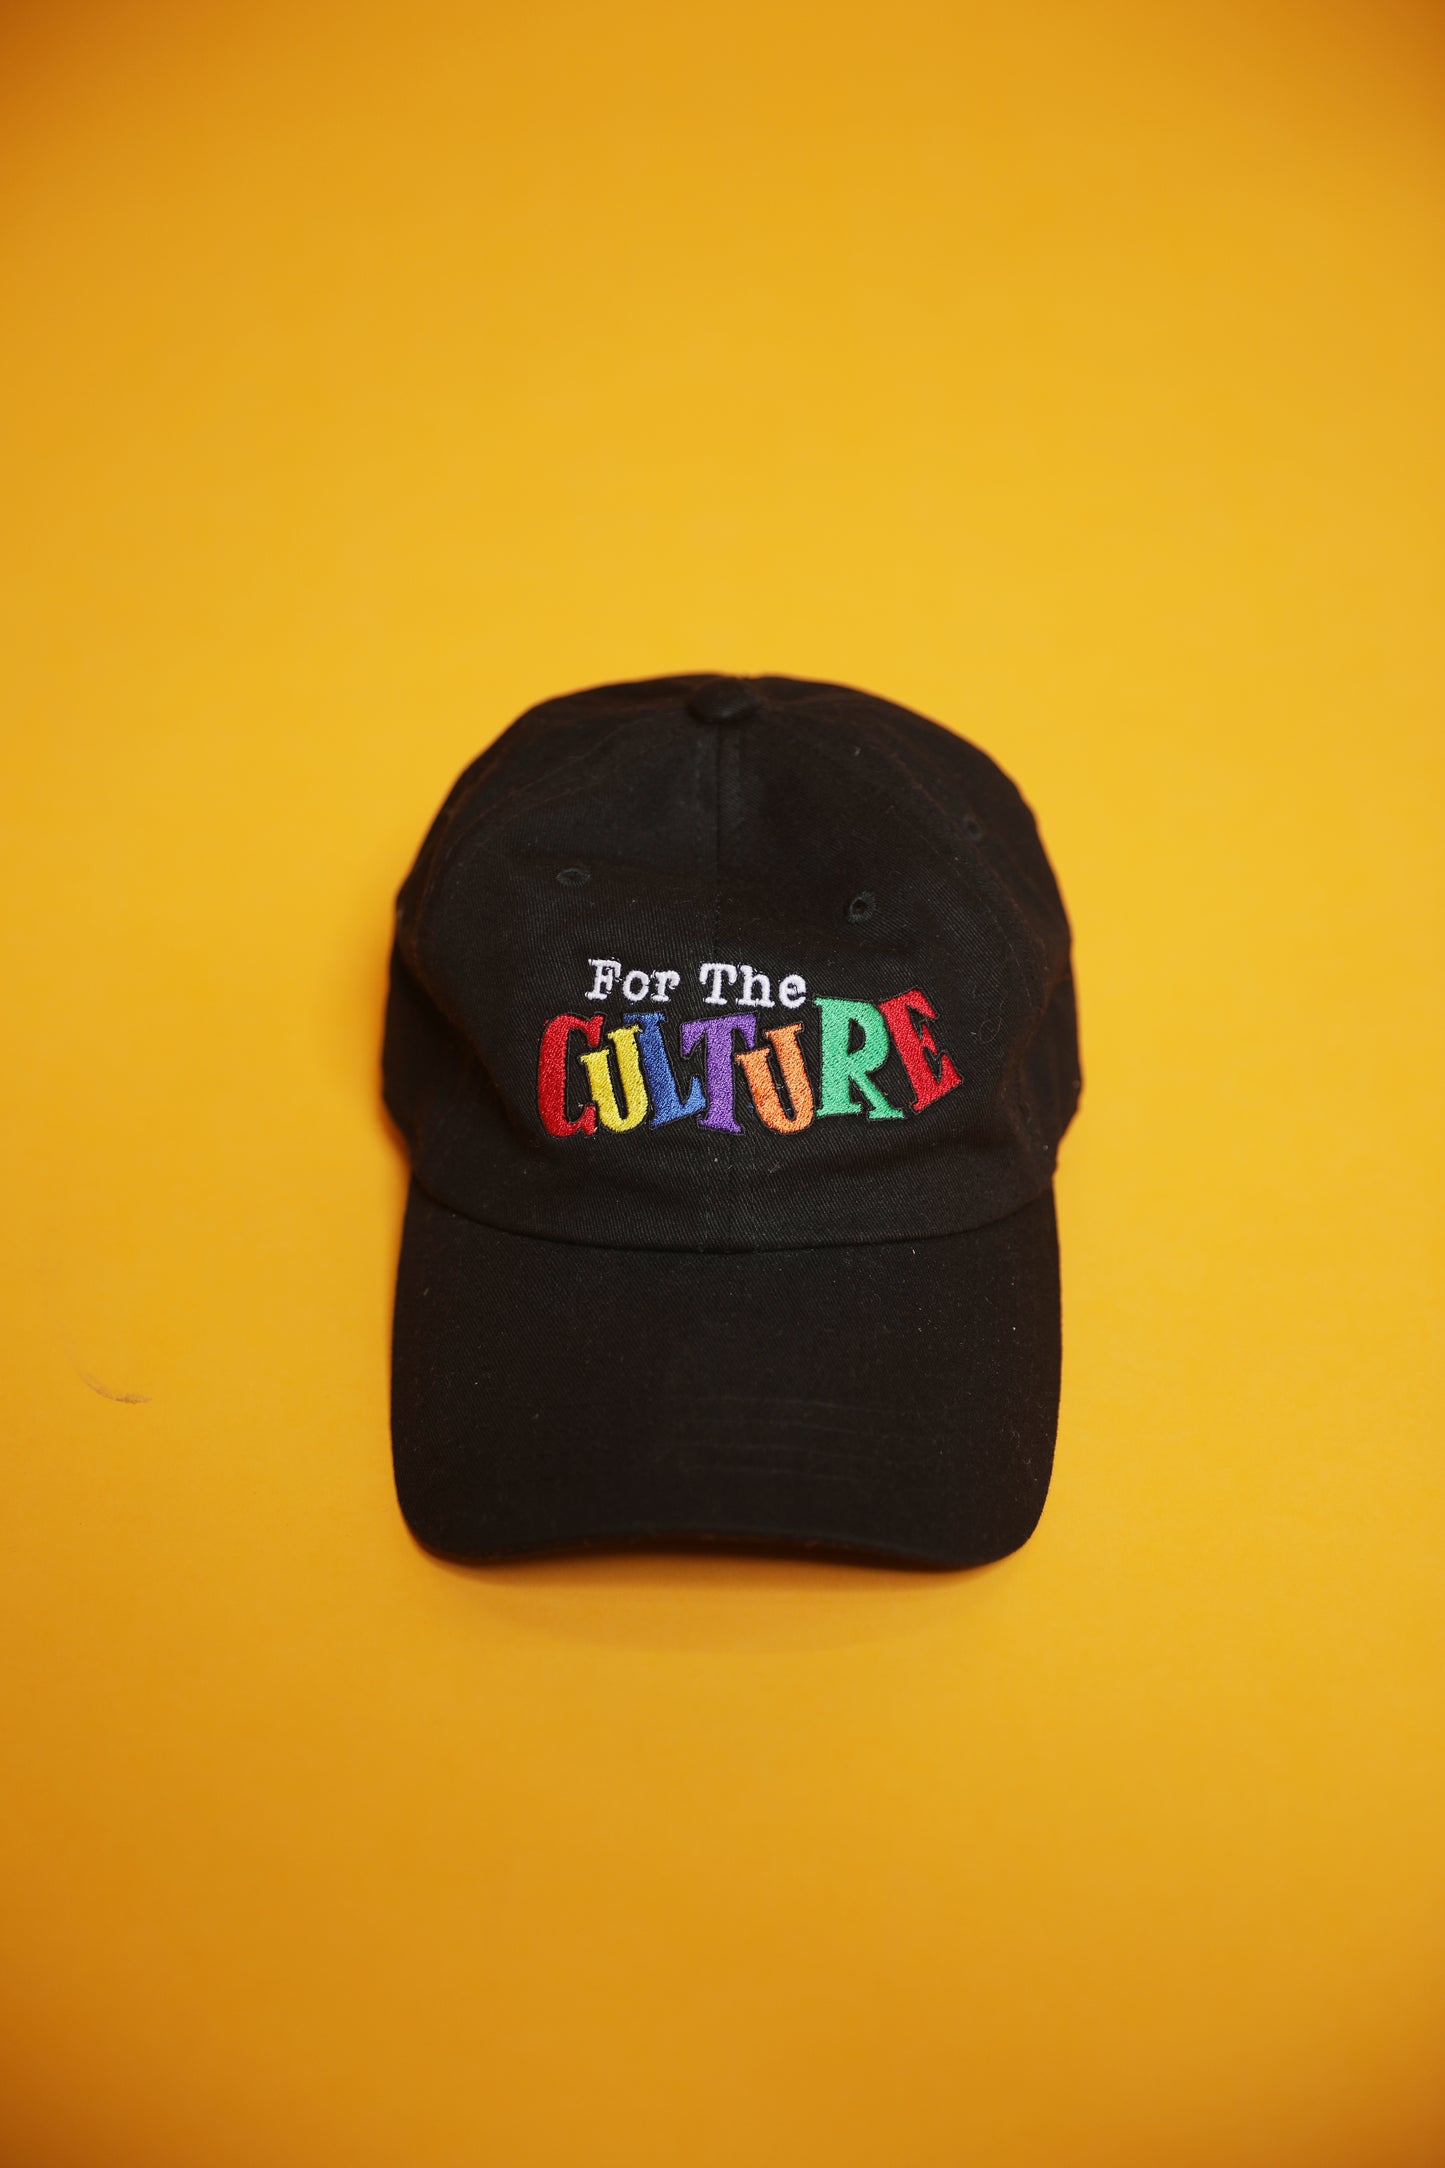 "For The Culture" Unisex Dad Hat in Distressed Black